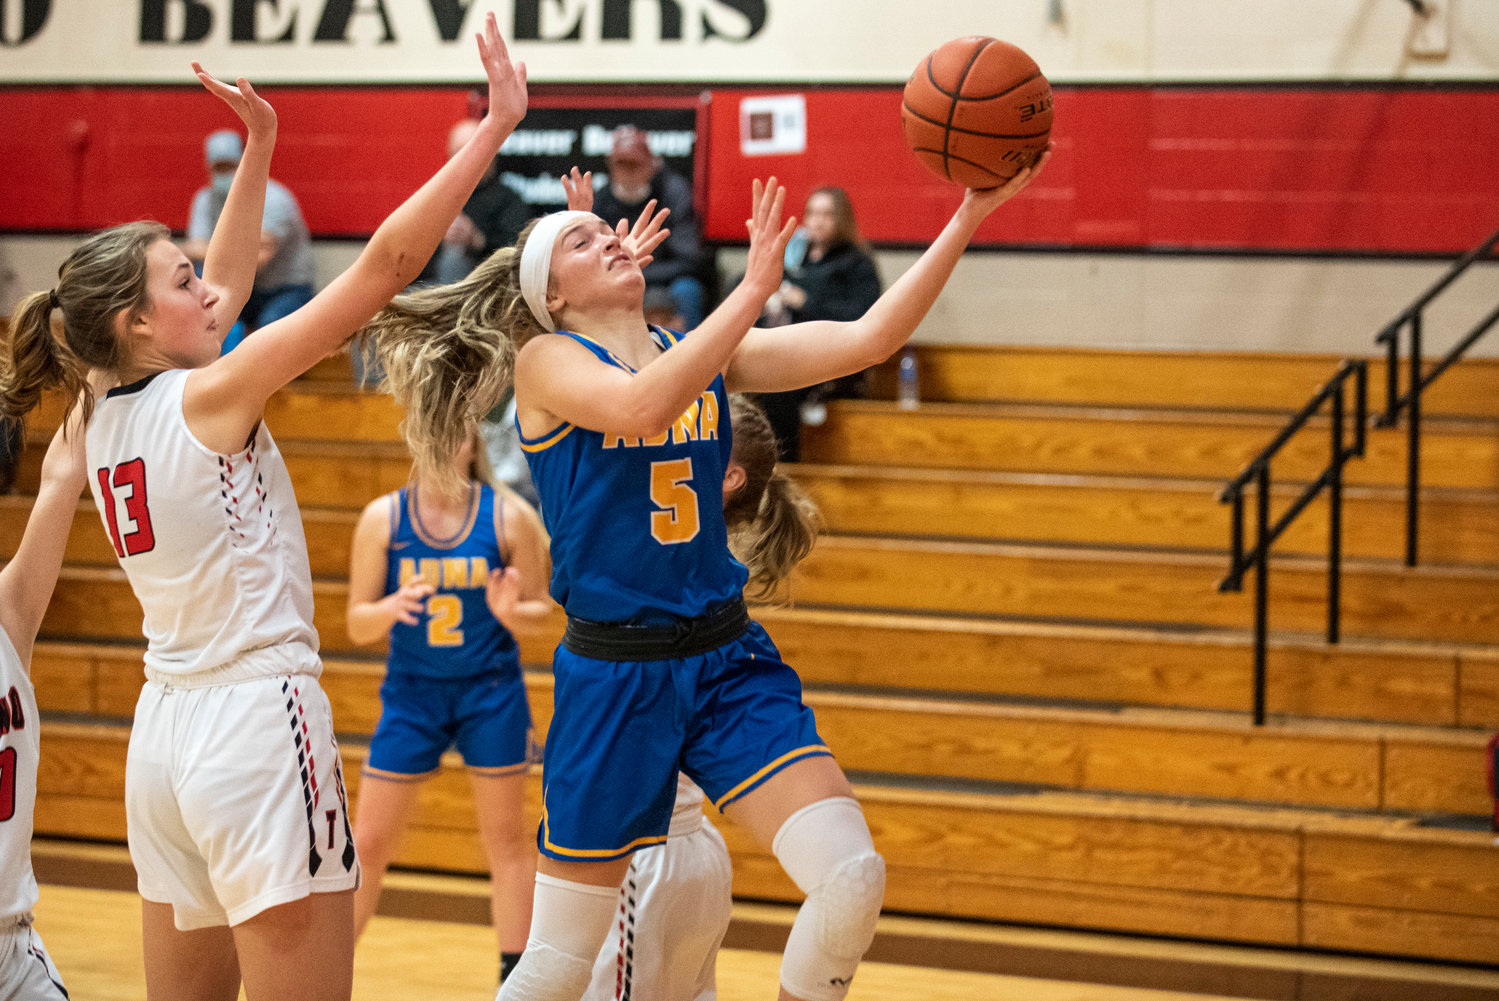 Adna's Kaylin Todd (5) skies for a layup against Tenino on Dec. 14.